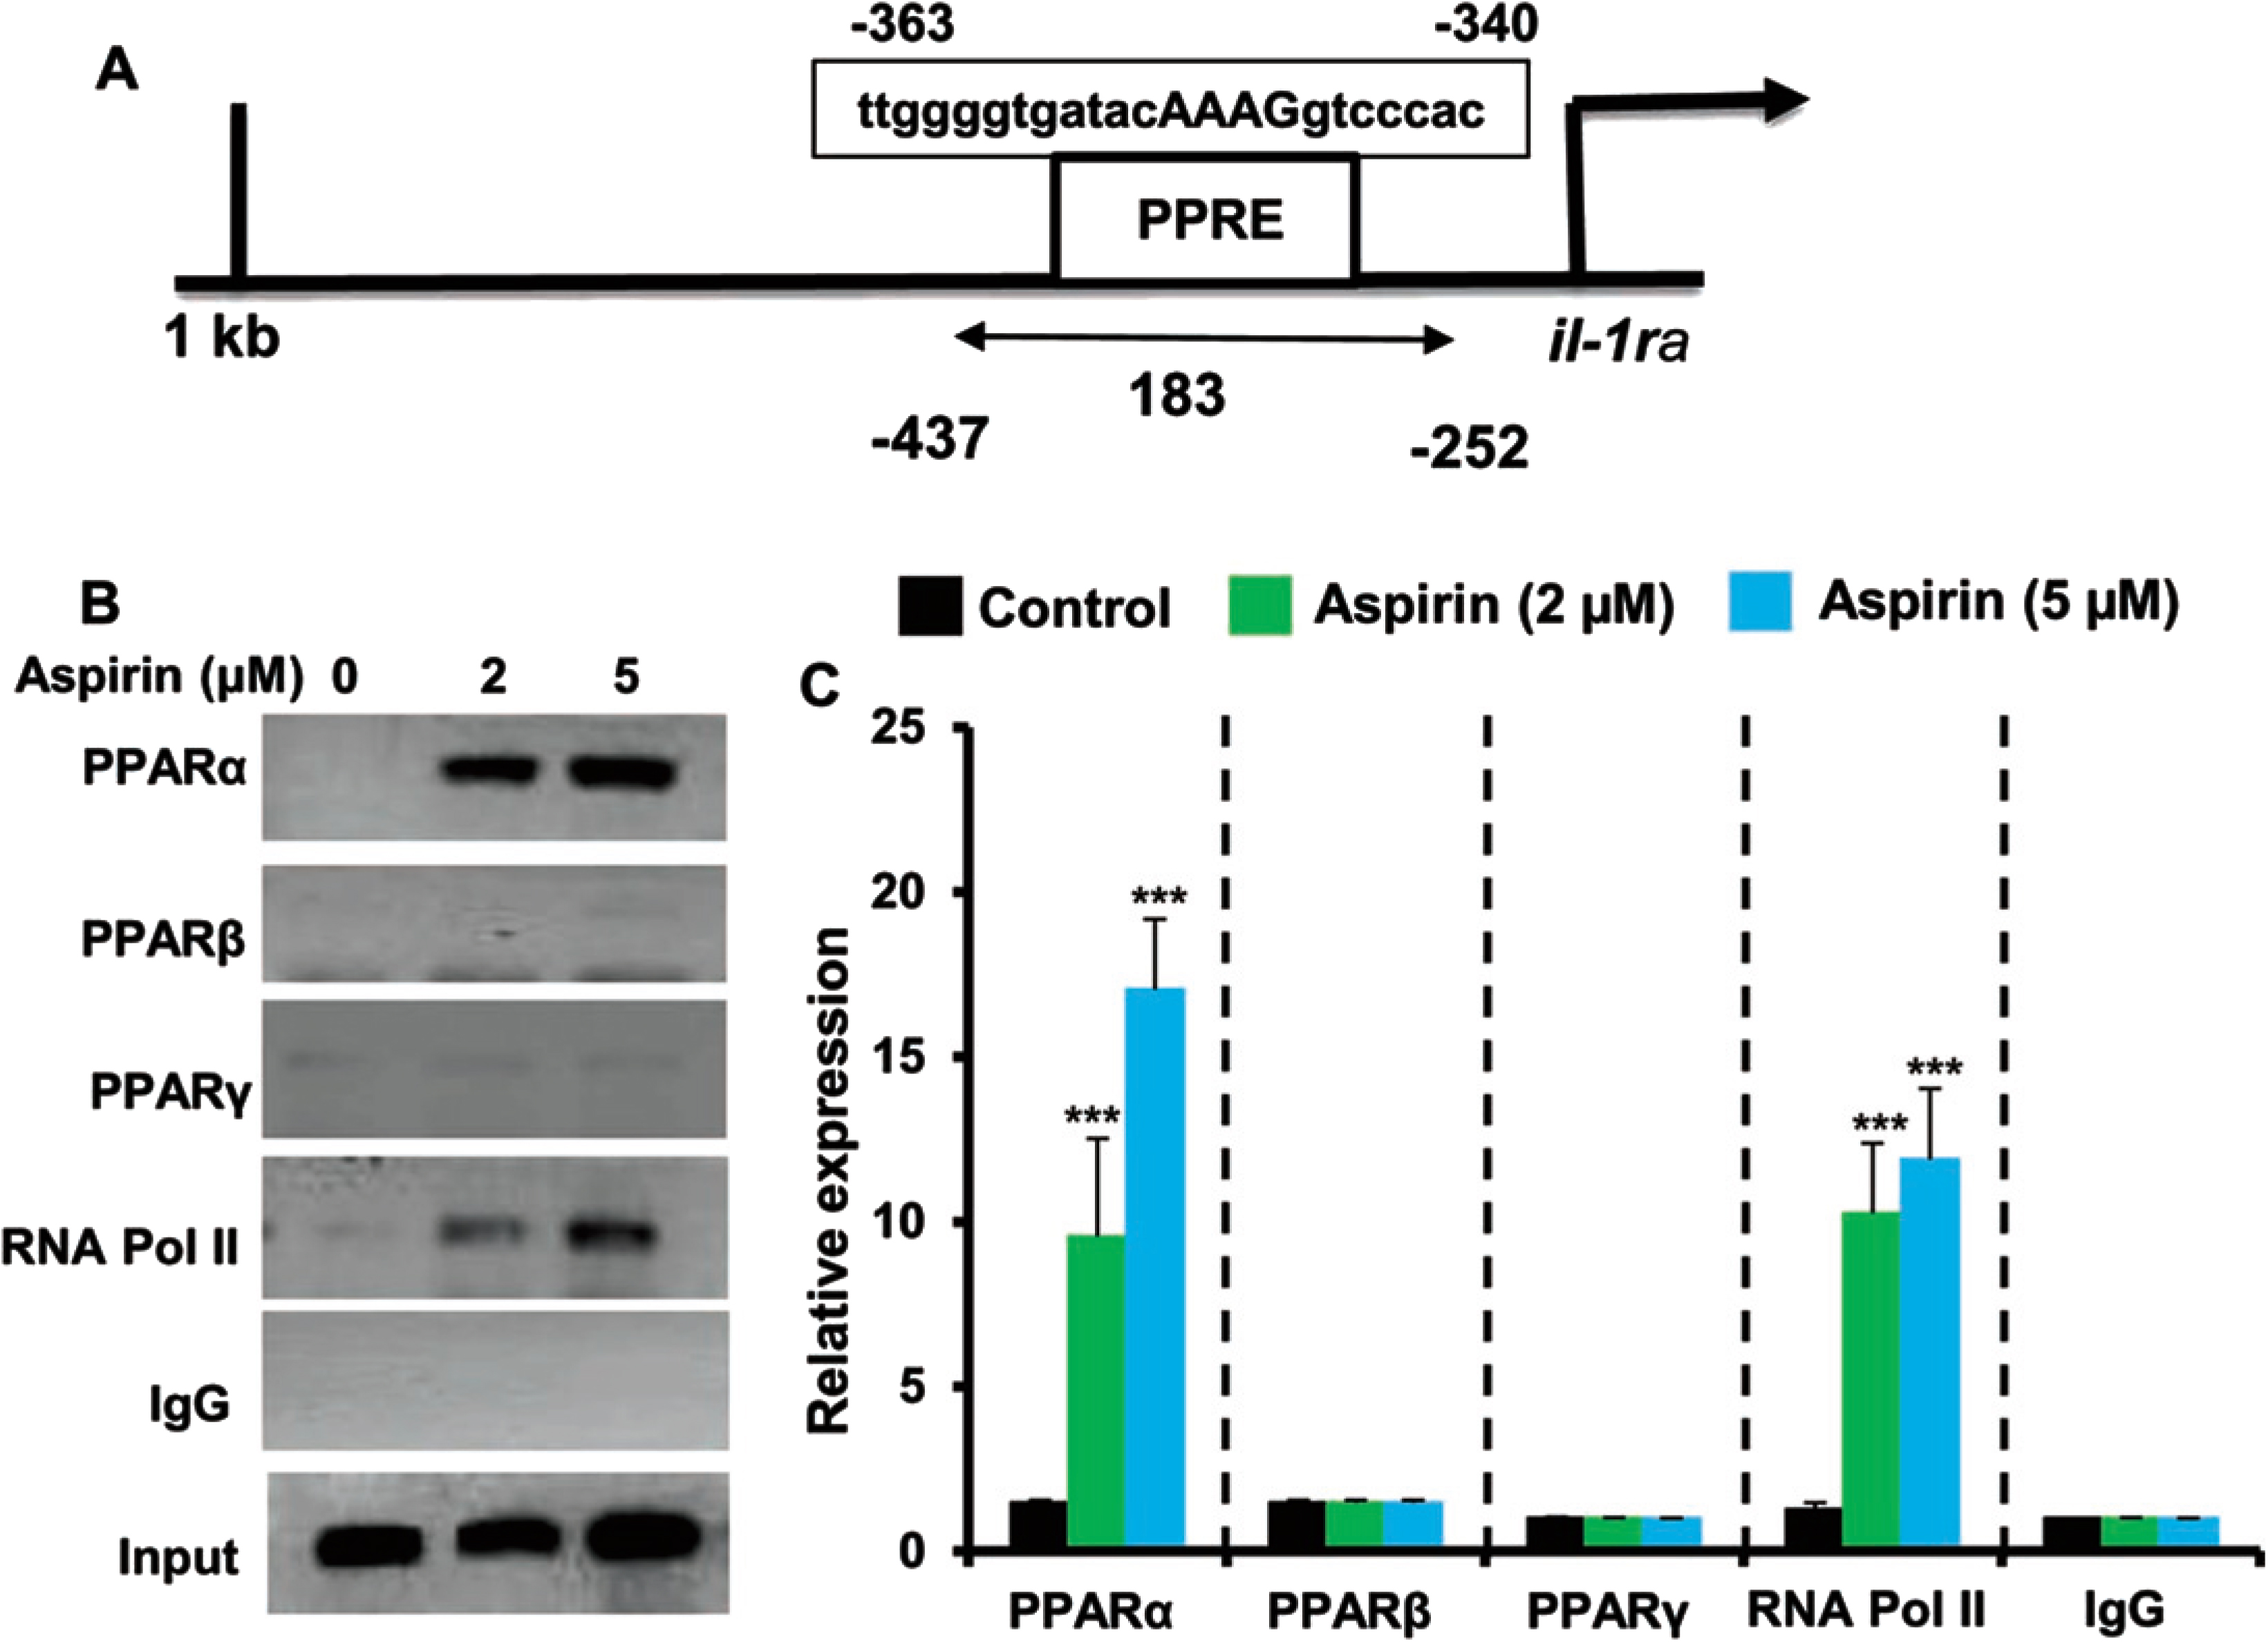 Aspirin induces the recruitment of PPARα to the IL-1Ra gene promotor. A) MAP of the PPRE in the IL-1Ra gene promoter and the region to be amplified for ChIP assay. Primary astrocytes isolated from WT mice were treated with different concentrations of aspirin for 30 min under serum-free condition followed by monitoring the recruitment of PPARα, PPARβ, PPARγ, and RNA Polymerase II to the PPRE by ChIP assay (B, PCR; C, real-time PCR). Results are mean±SD of three independent cell preparations. ***p < 0.001 versus control. Significance of mean between control and aspirin-treated cells was analyzed by a two-tailed paired t-test.